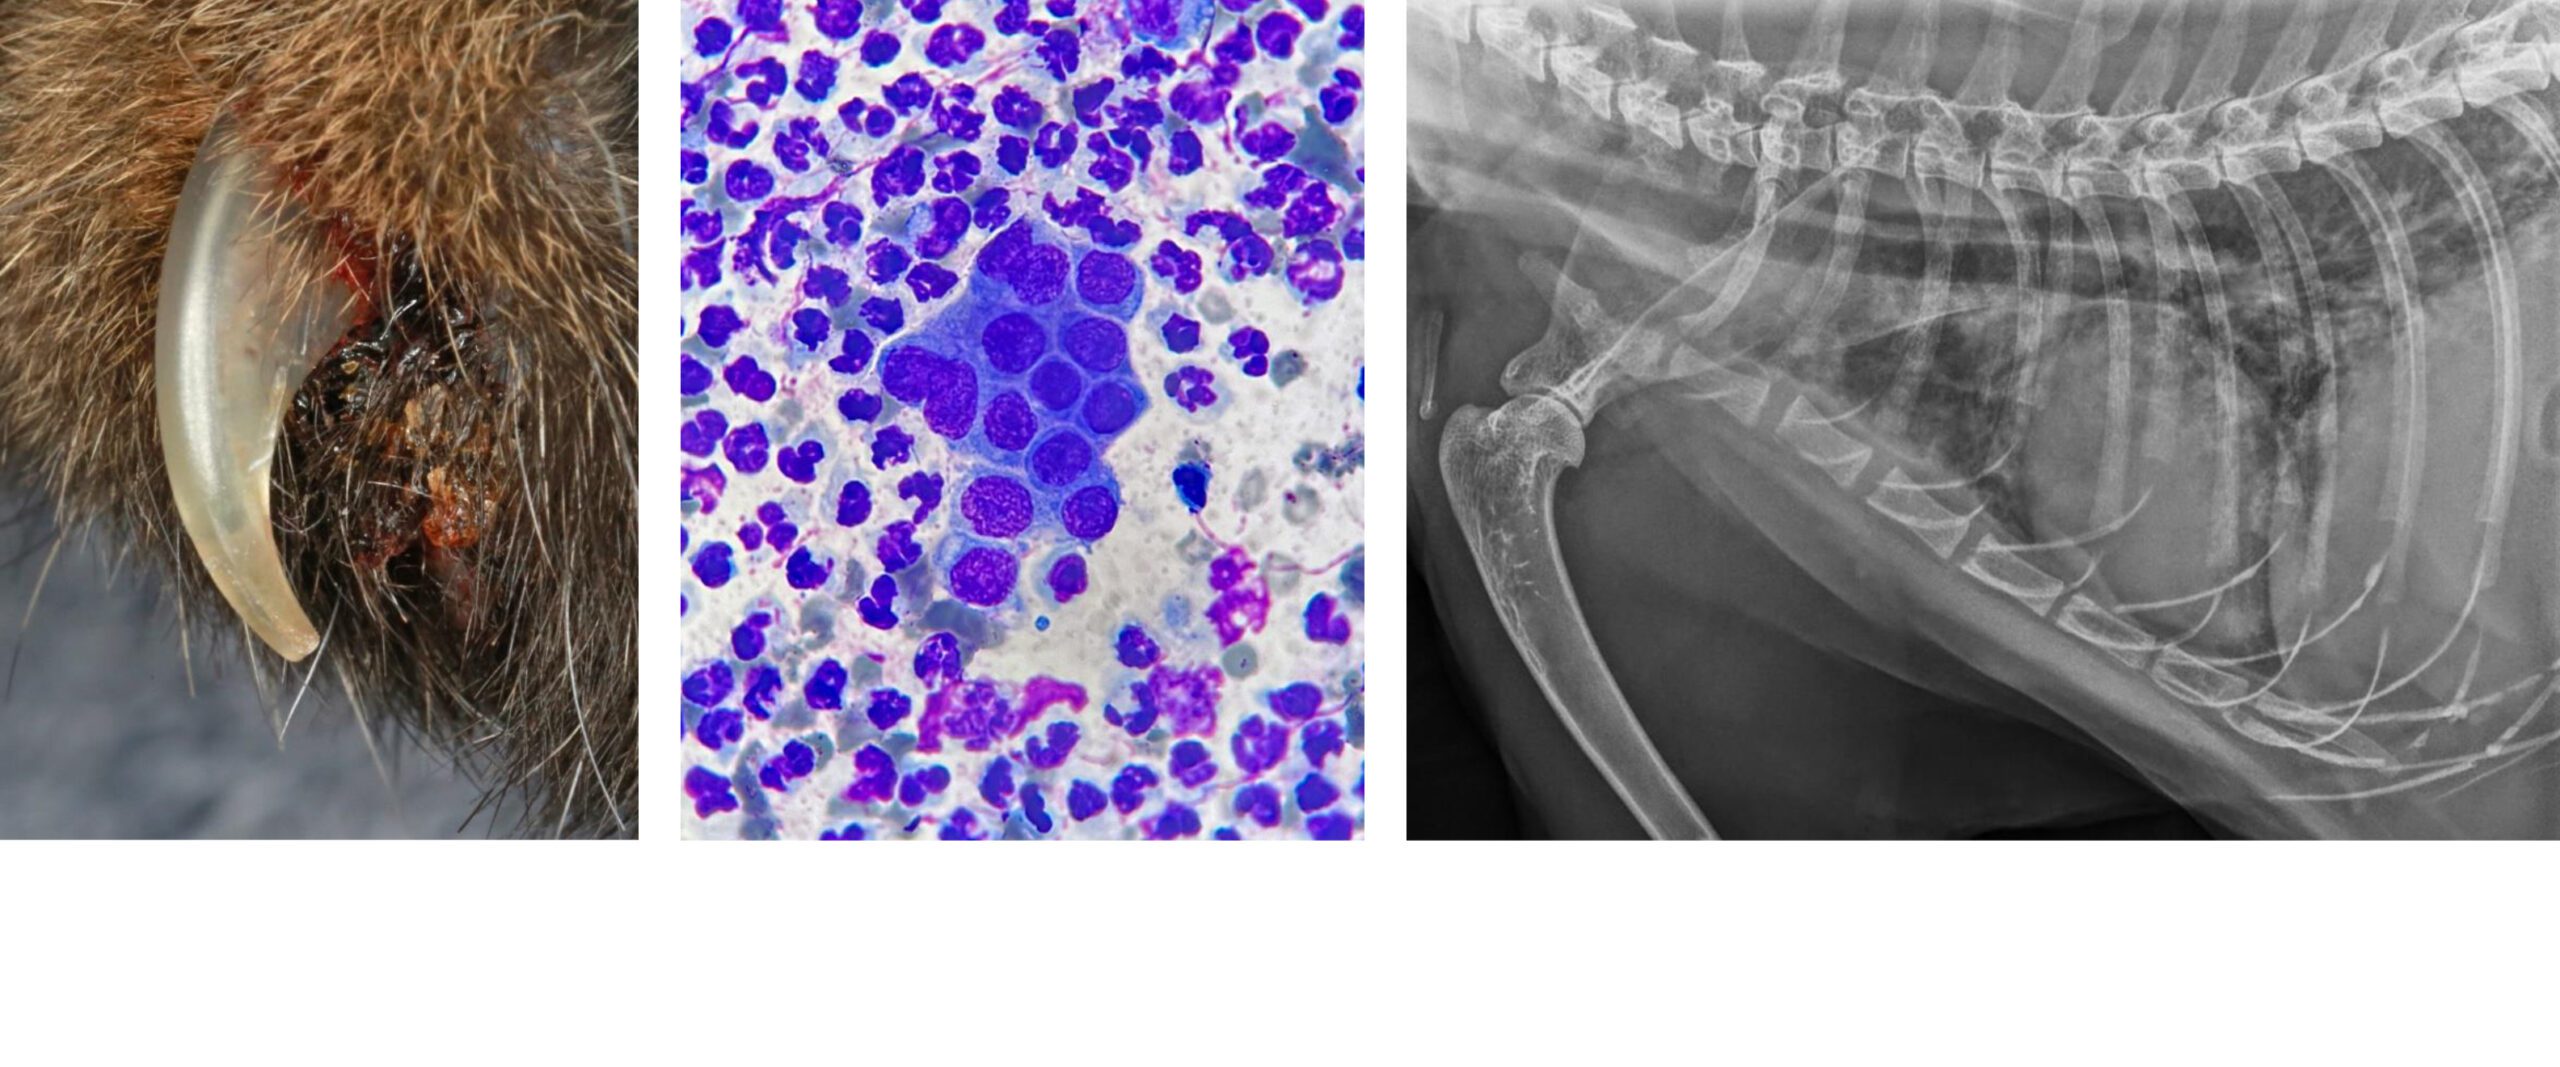 Rare Lung-Digit Syndrome: Chronic Claw Bed 'Infection': 1st Consultation Neoplastic cells within Pus on Simple Rapid Cytology; Neoplastic Infiltrates in Lungs on Reviewed Past Chest XRay